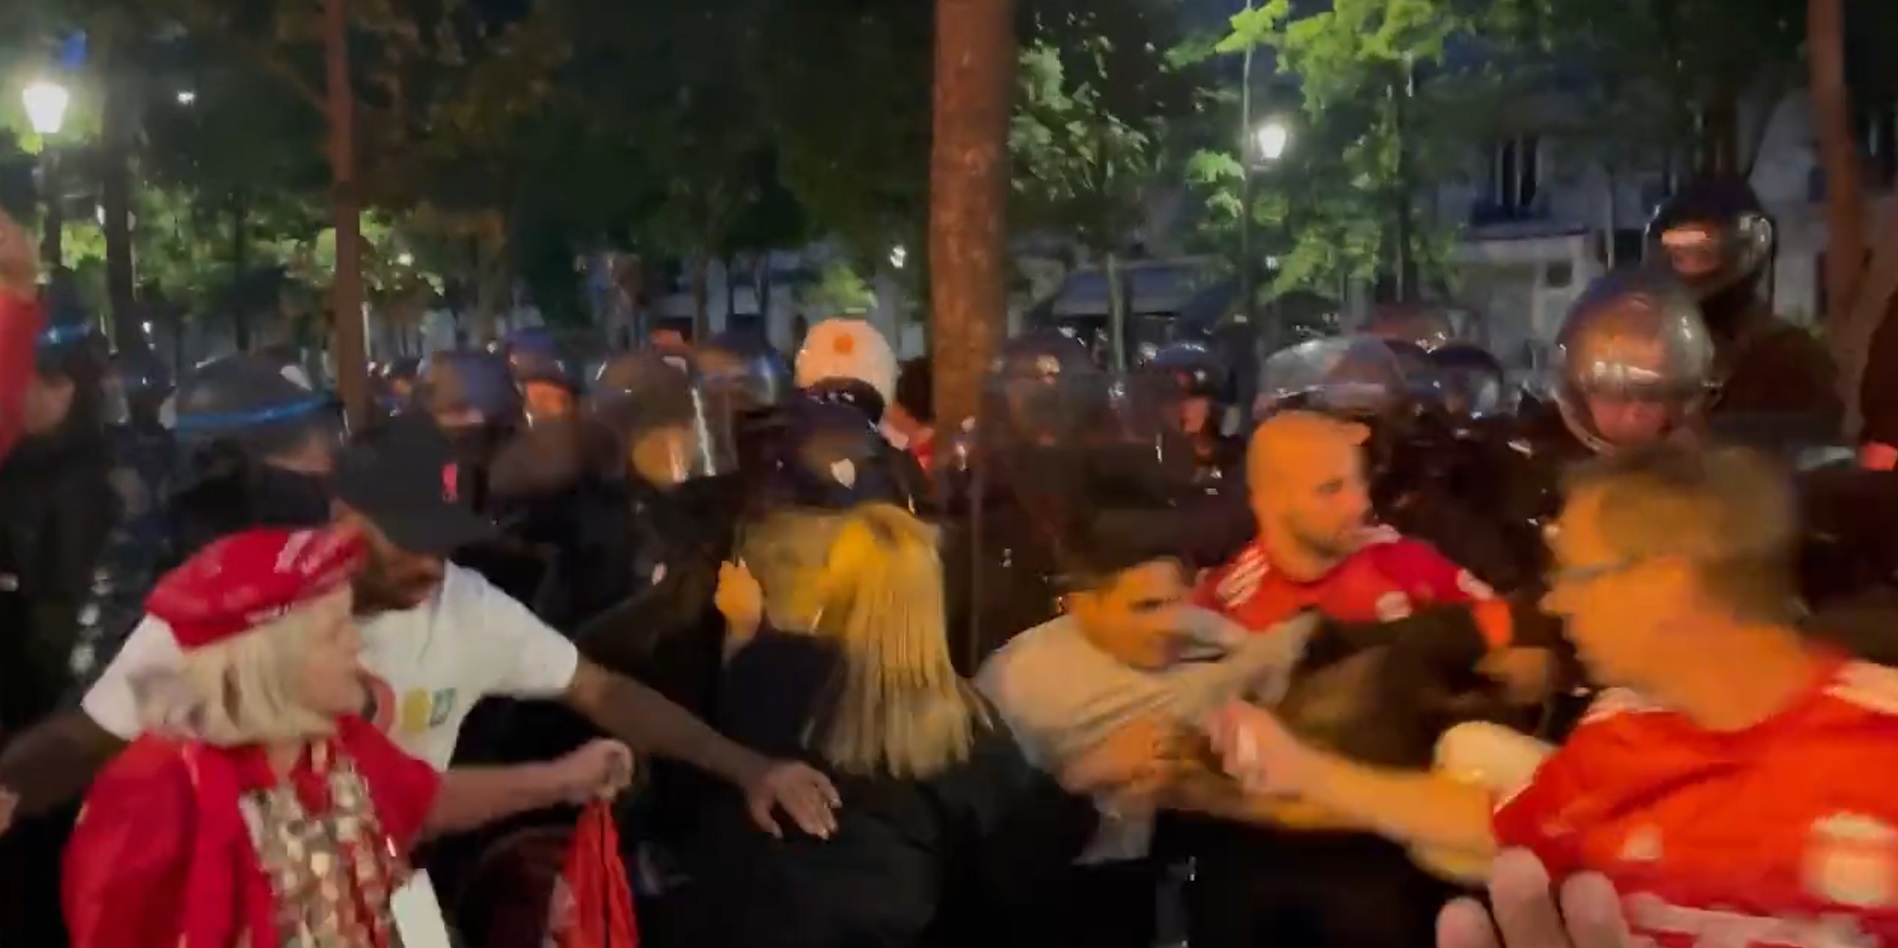 (Video) ‘Beaten with truncheons’ – French journalist’s footage appears to show police charging Liverpool fans unprovoked